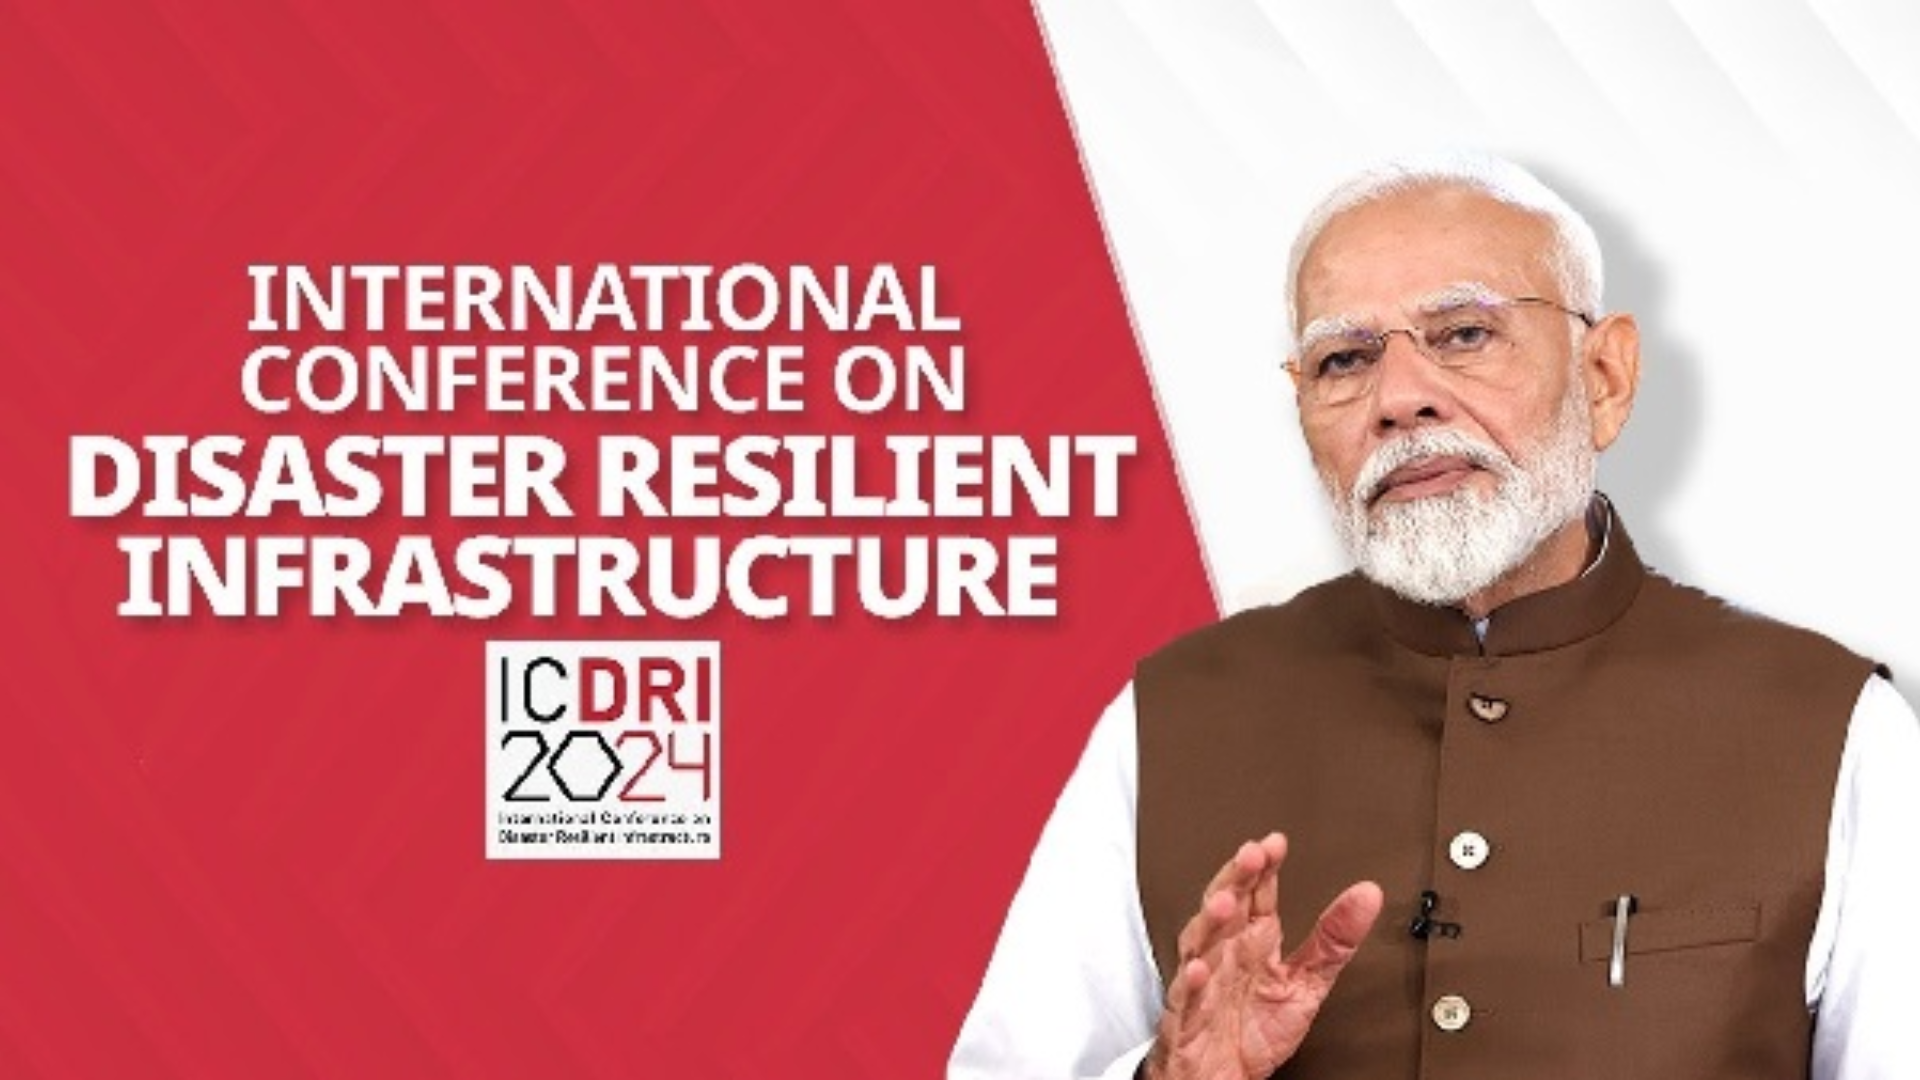 Prime Minister Modi Urges Global Investment in Resilient Infrastructure to Mitigate Natural Disasters